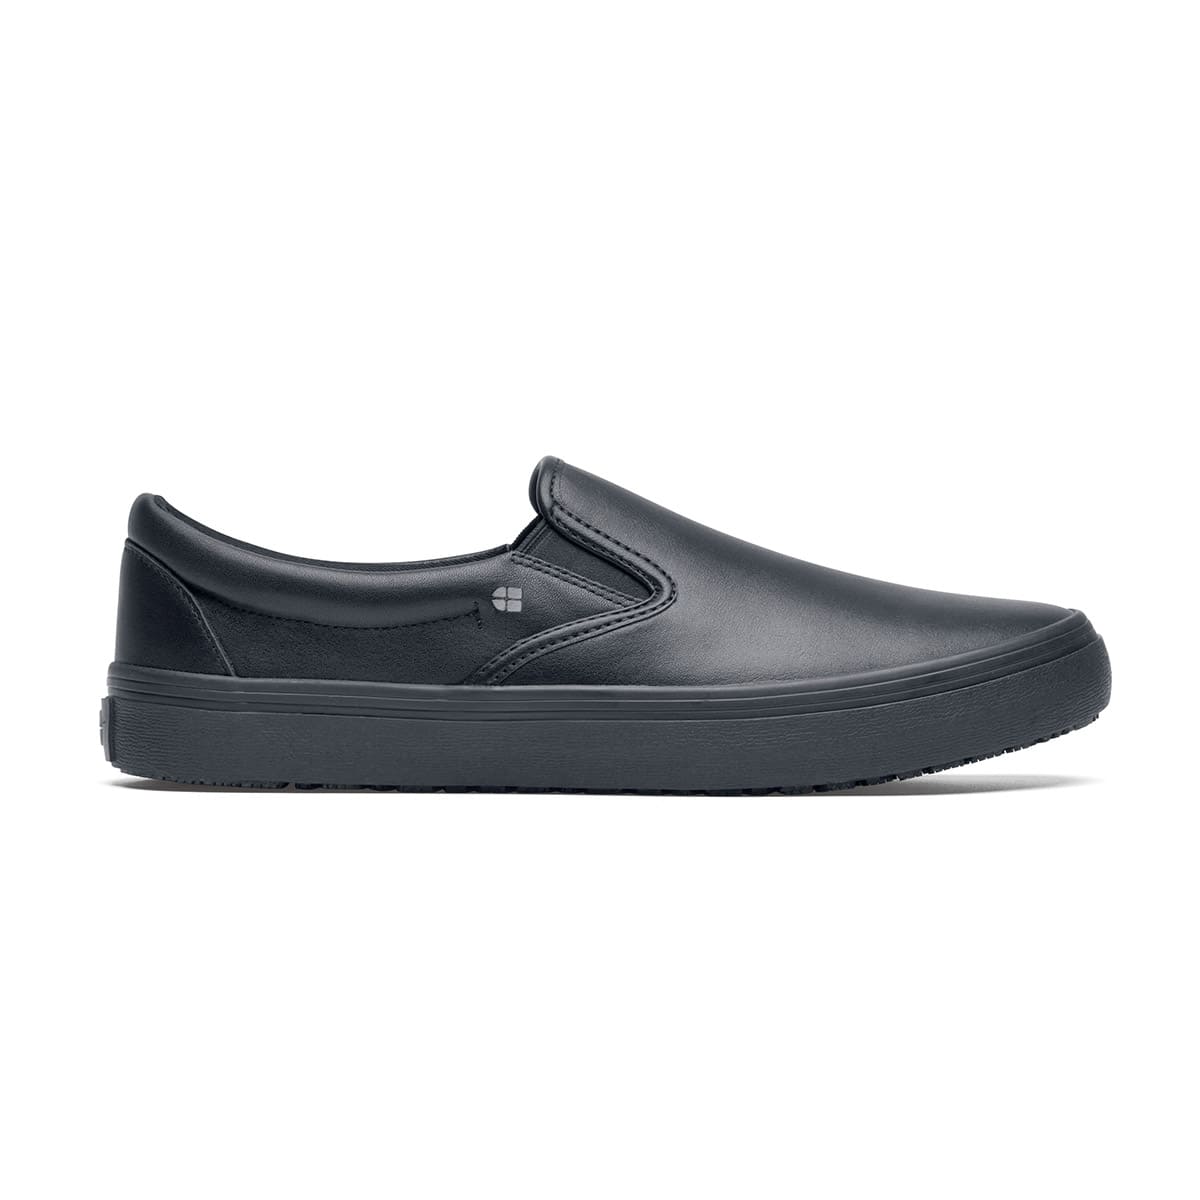 The Merlin Black from Shoes For Crews are slip-on slip resistant shoes with a lightweight design and constructed from genuine leather that has been specially treated to repel liquids from the surface, seen from the right.